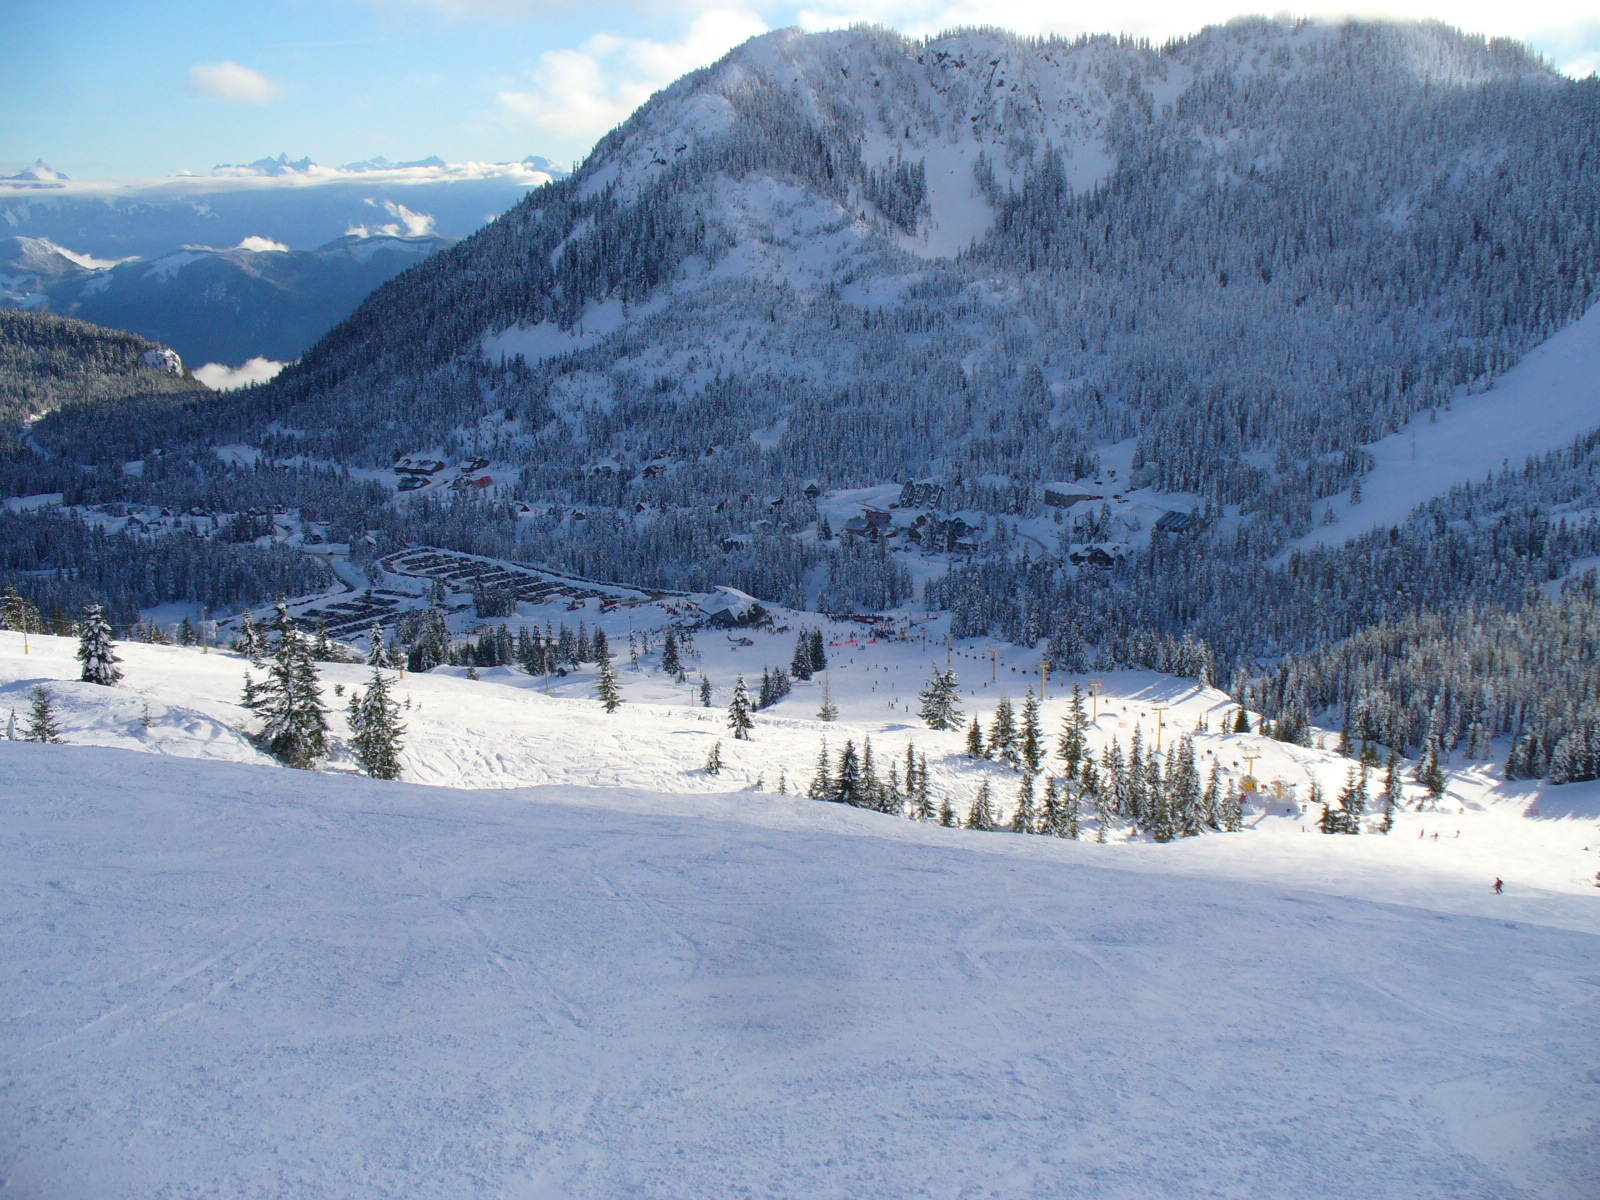 Hemlock Valley January 13, 2013 from the top of the Sasquatch Chair, Sasquatch Mountain Resort